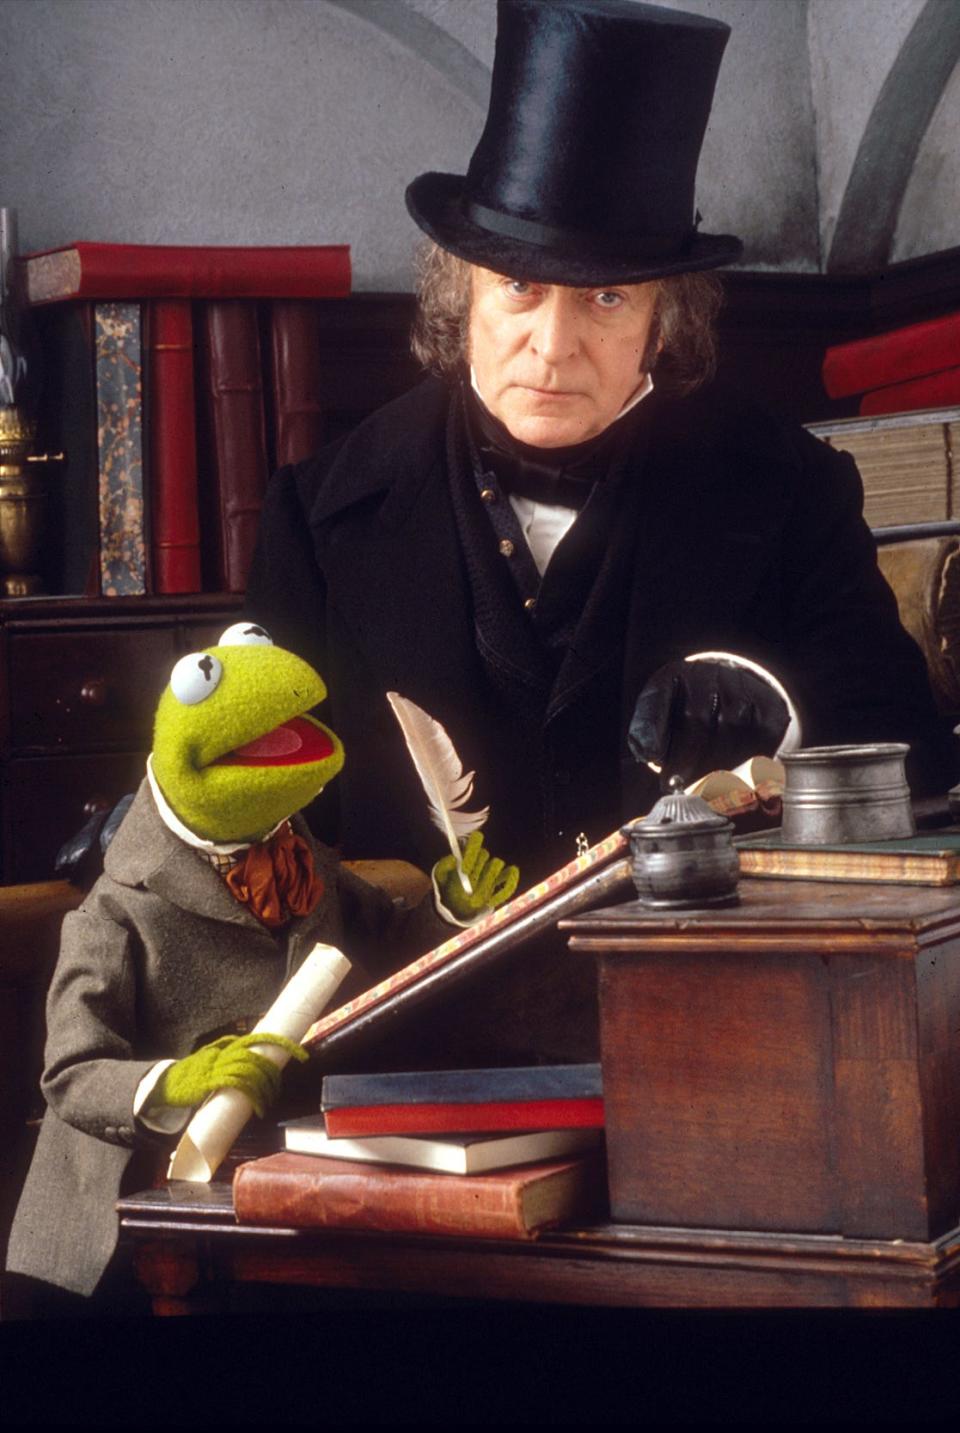 Kermit the Frog and Michael Caine in "The Muppet Christmas Carol."